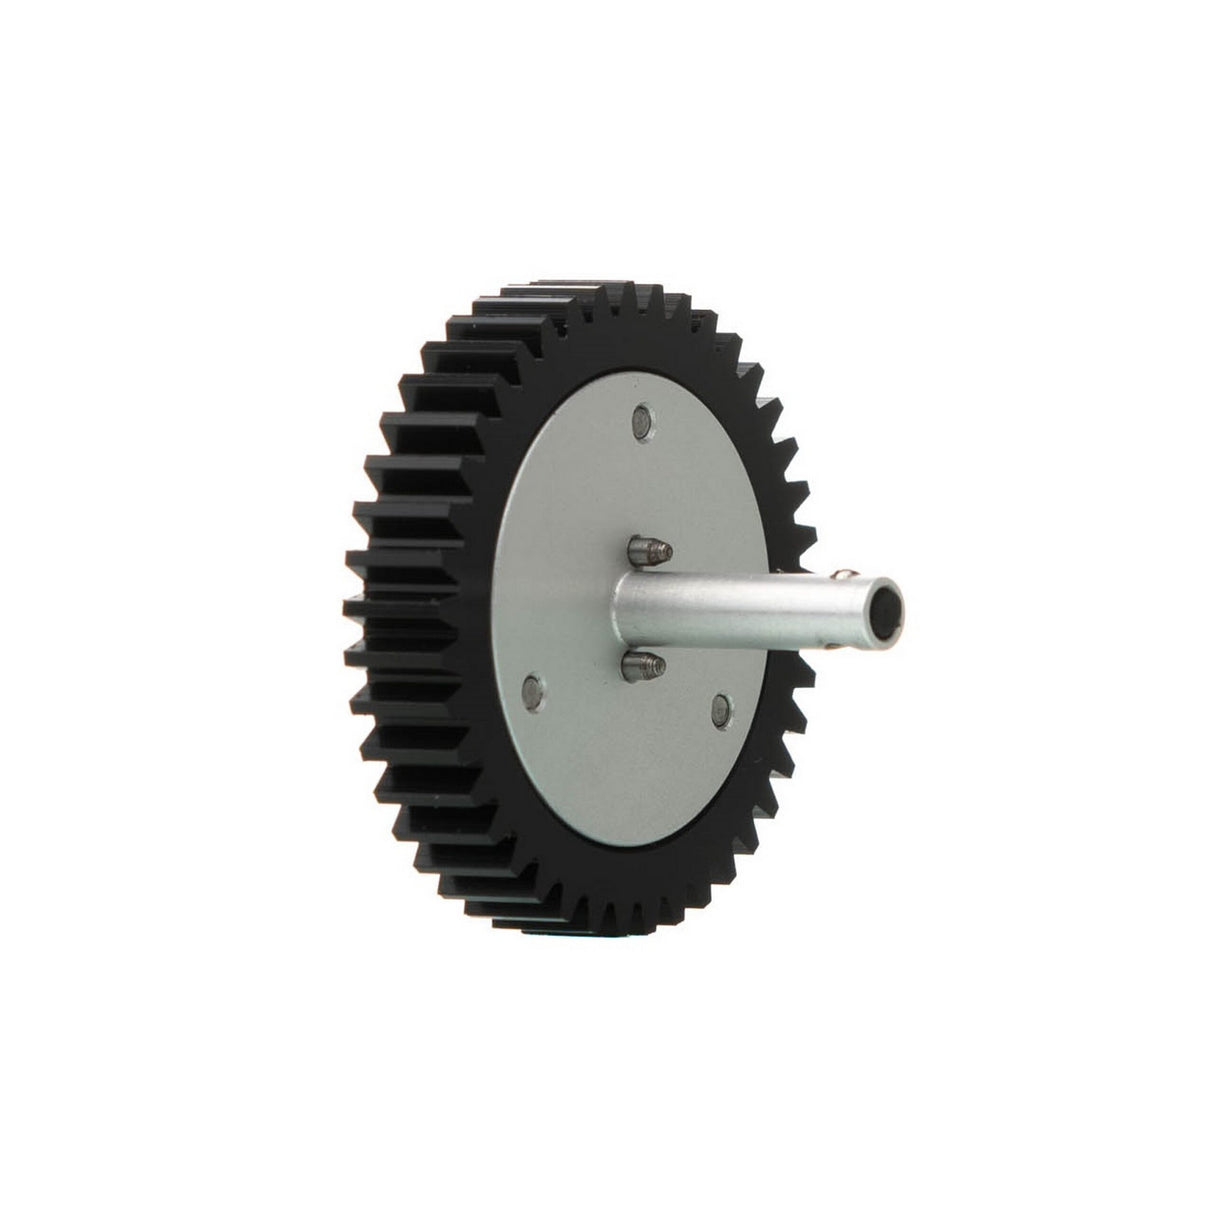 Heden M21VE-L 256-3.3K Motor with Dual Pin Hub